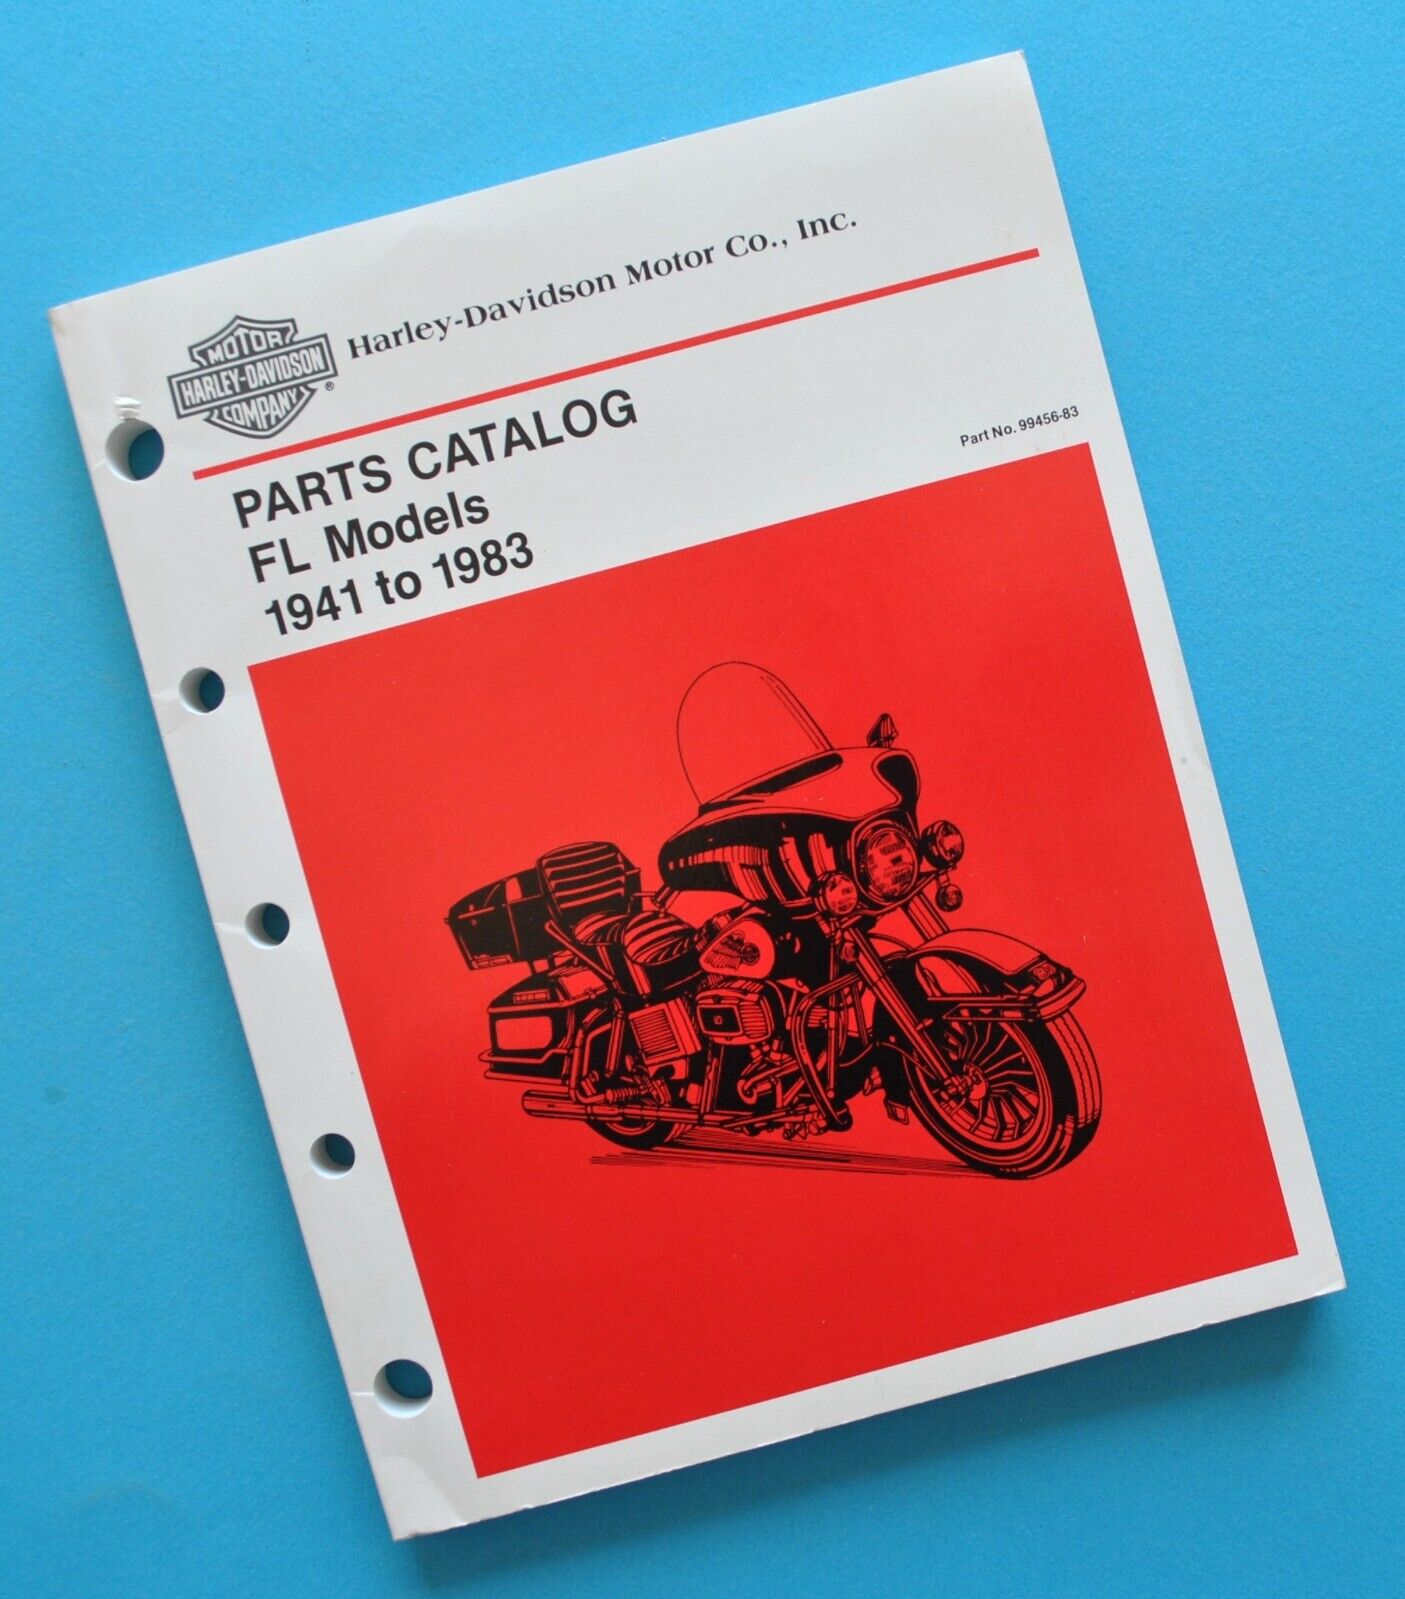 1941 - 1983 Harley Parts Catalog Manual Book FL FLH FLHS Electra Glide Panhead